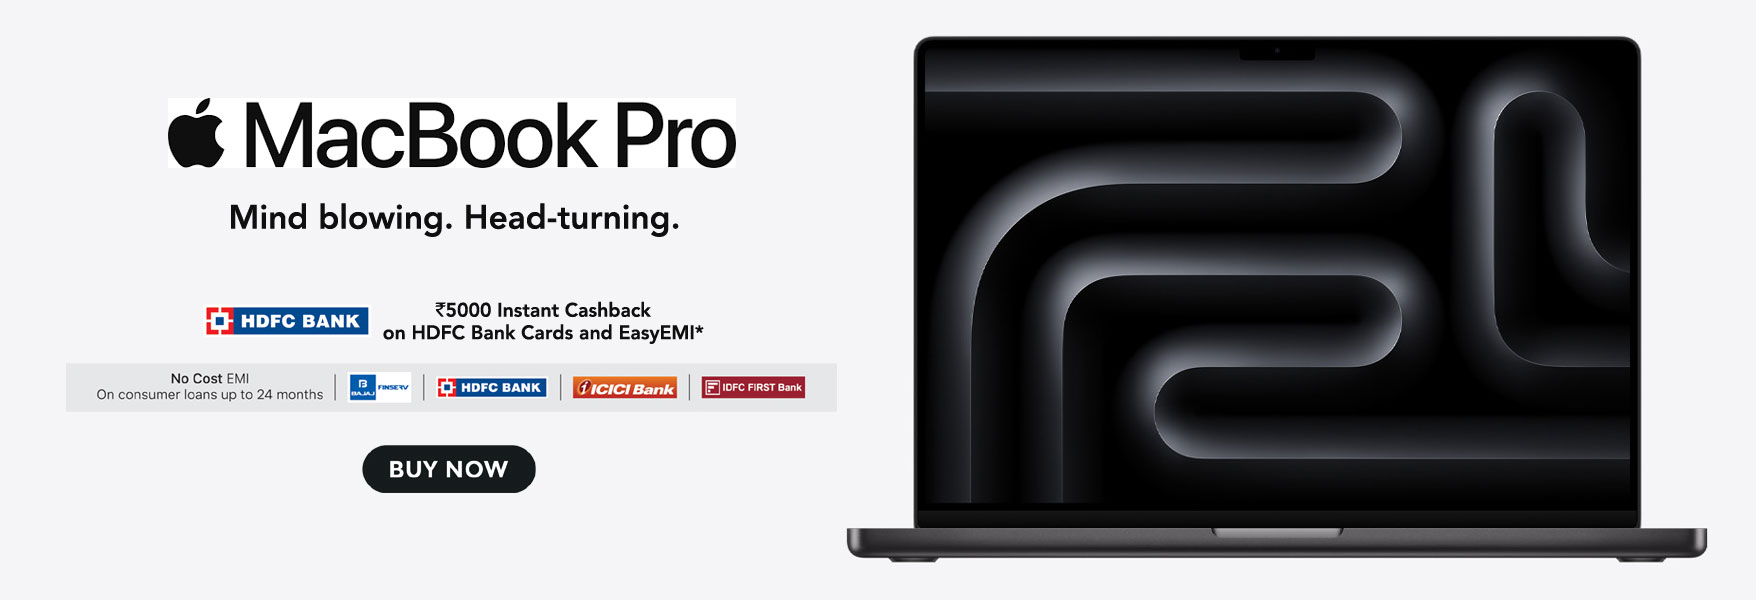 Experience all New MacBook Pro